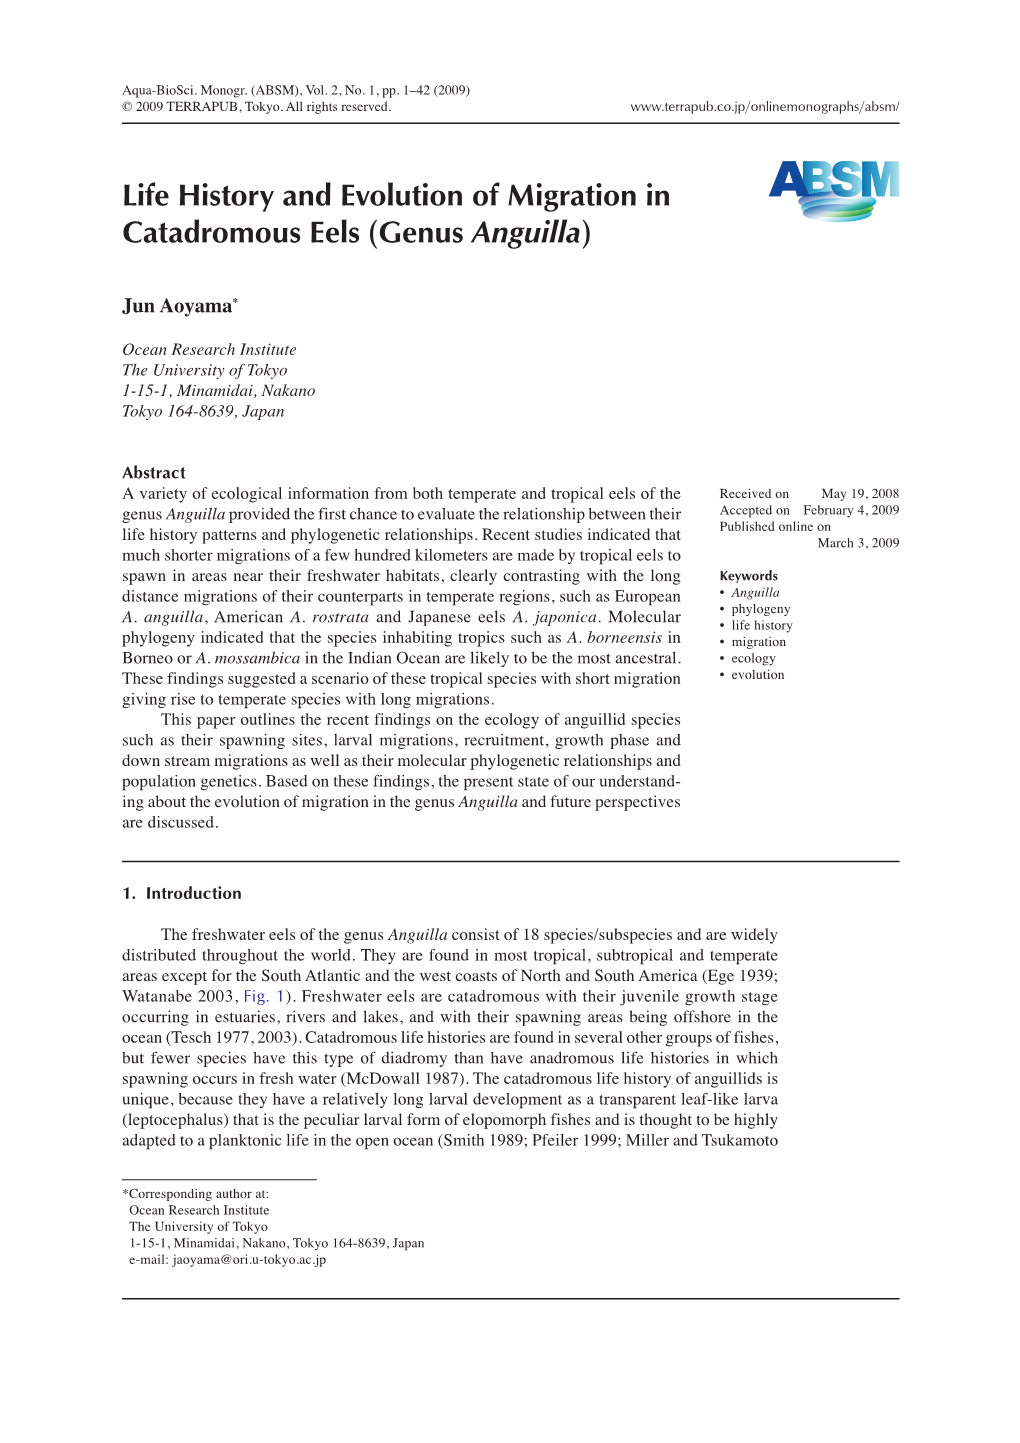 Life History and Evolution of Migration in Catadromous Eels (Genus Anguilla)